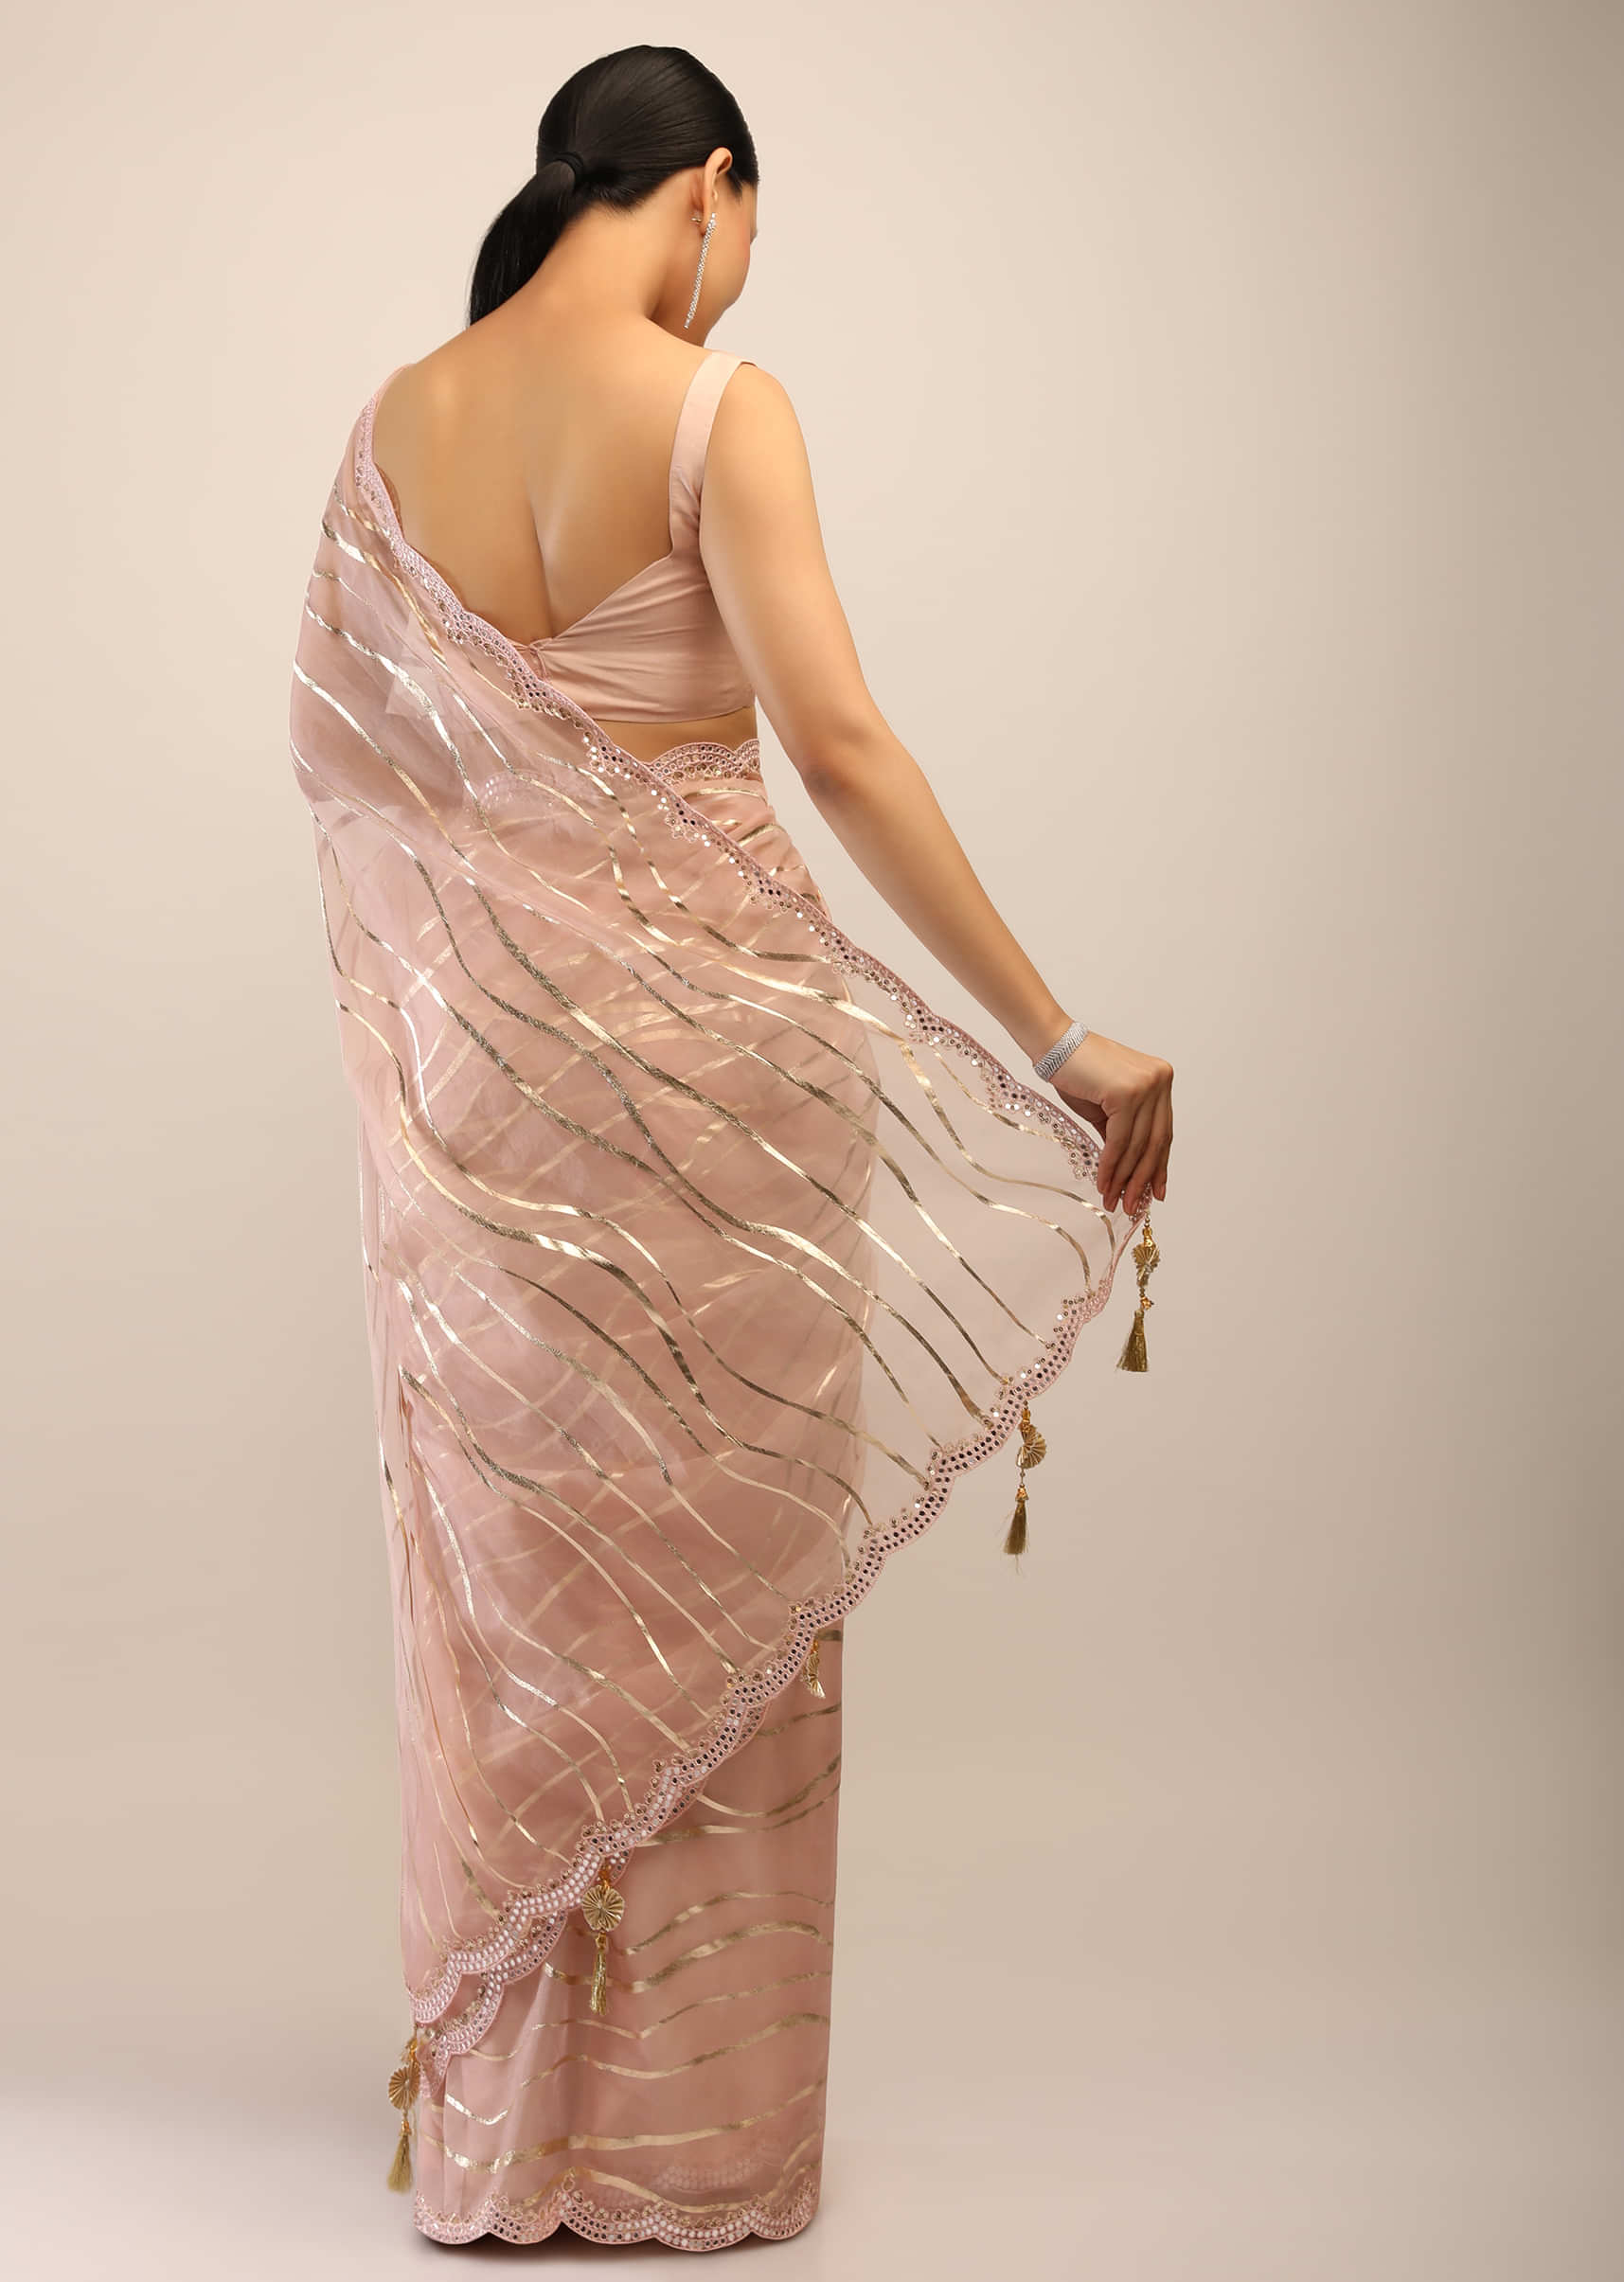 Powder Peach Saree In Organza With Foil Printed Scattered Dots And Mirror Embroidered Scallop Border